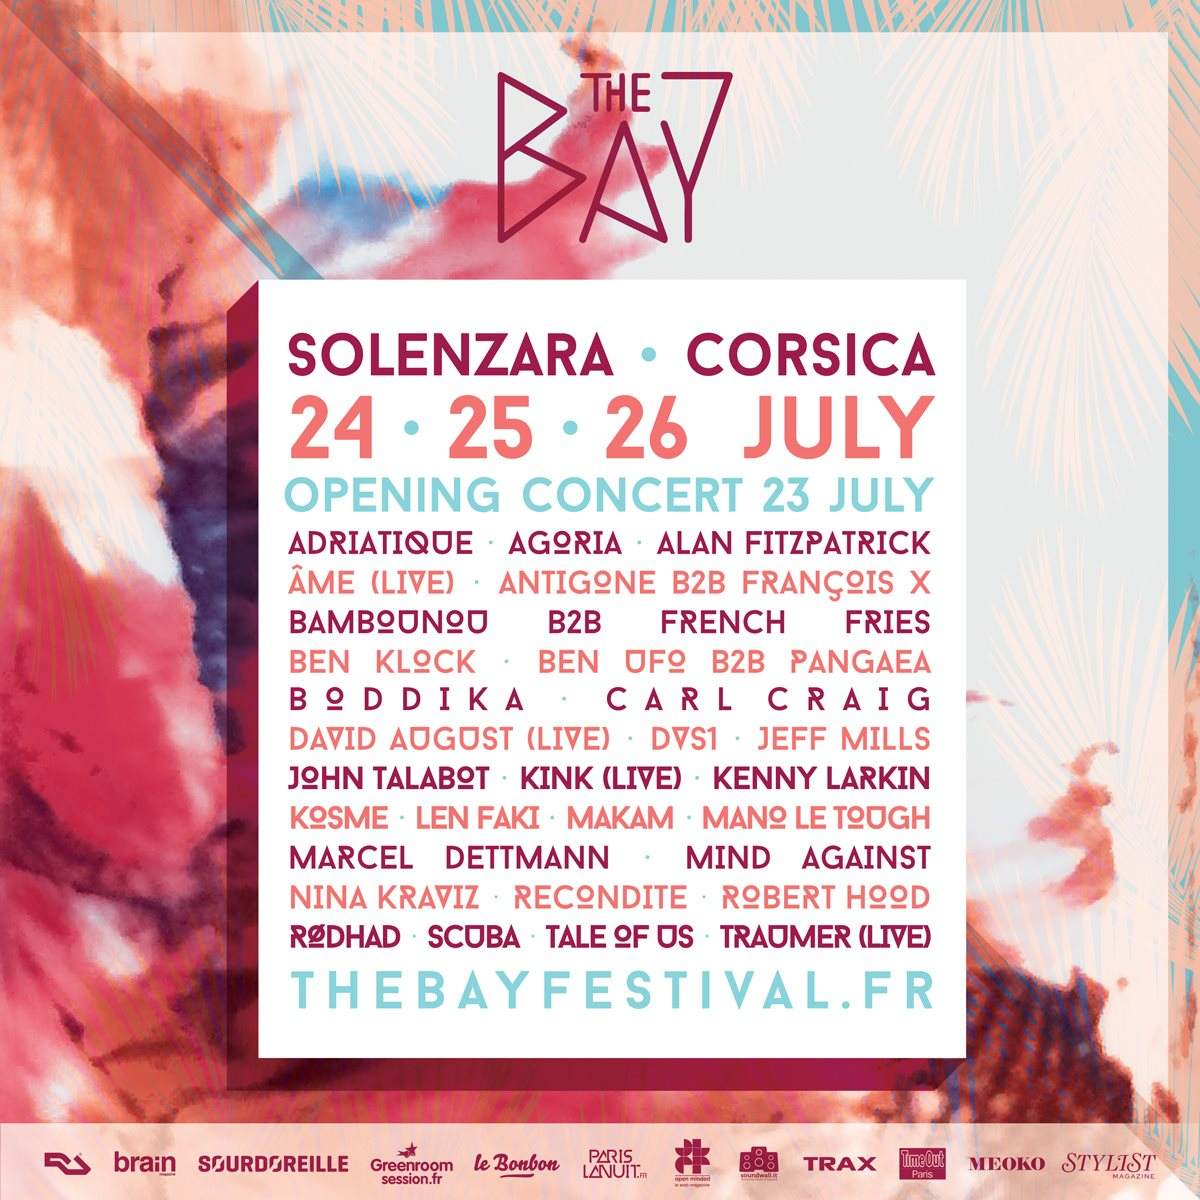 [CANCELLED] ]The Bay Festival 2015 - Página frontal